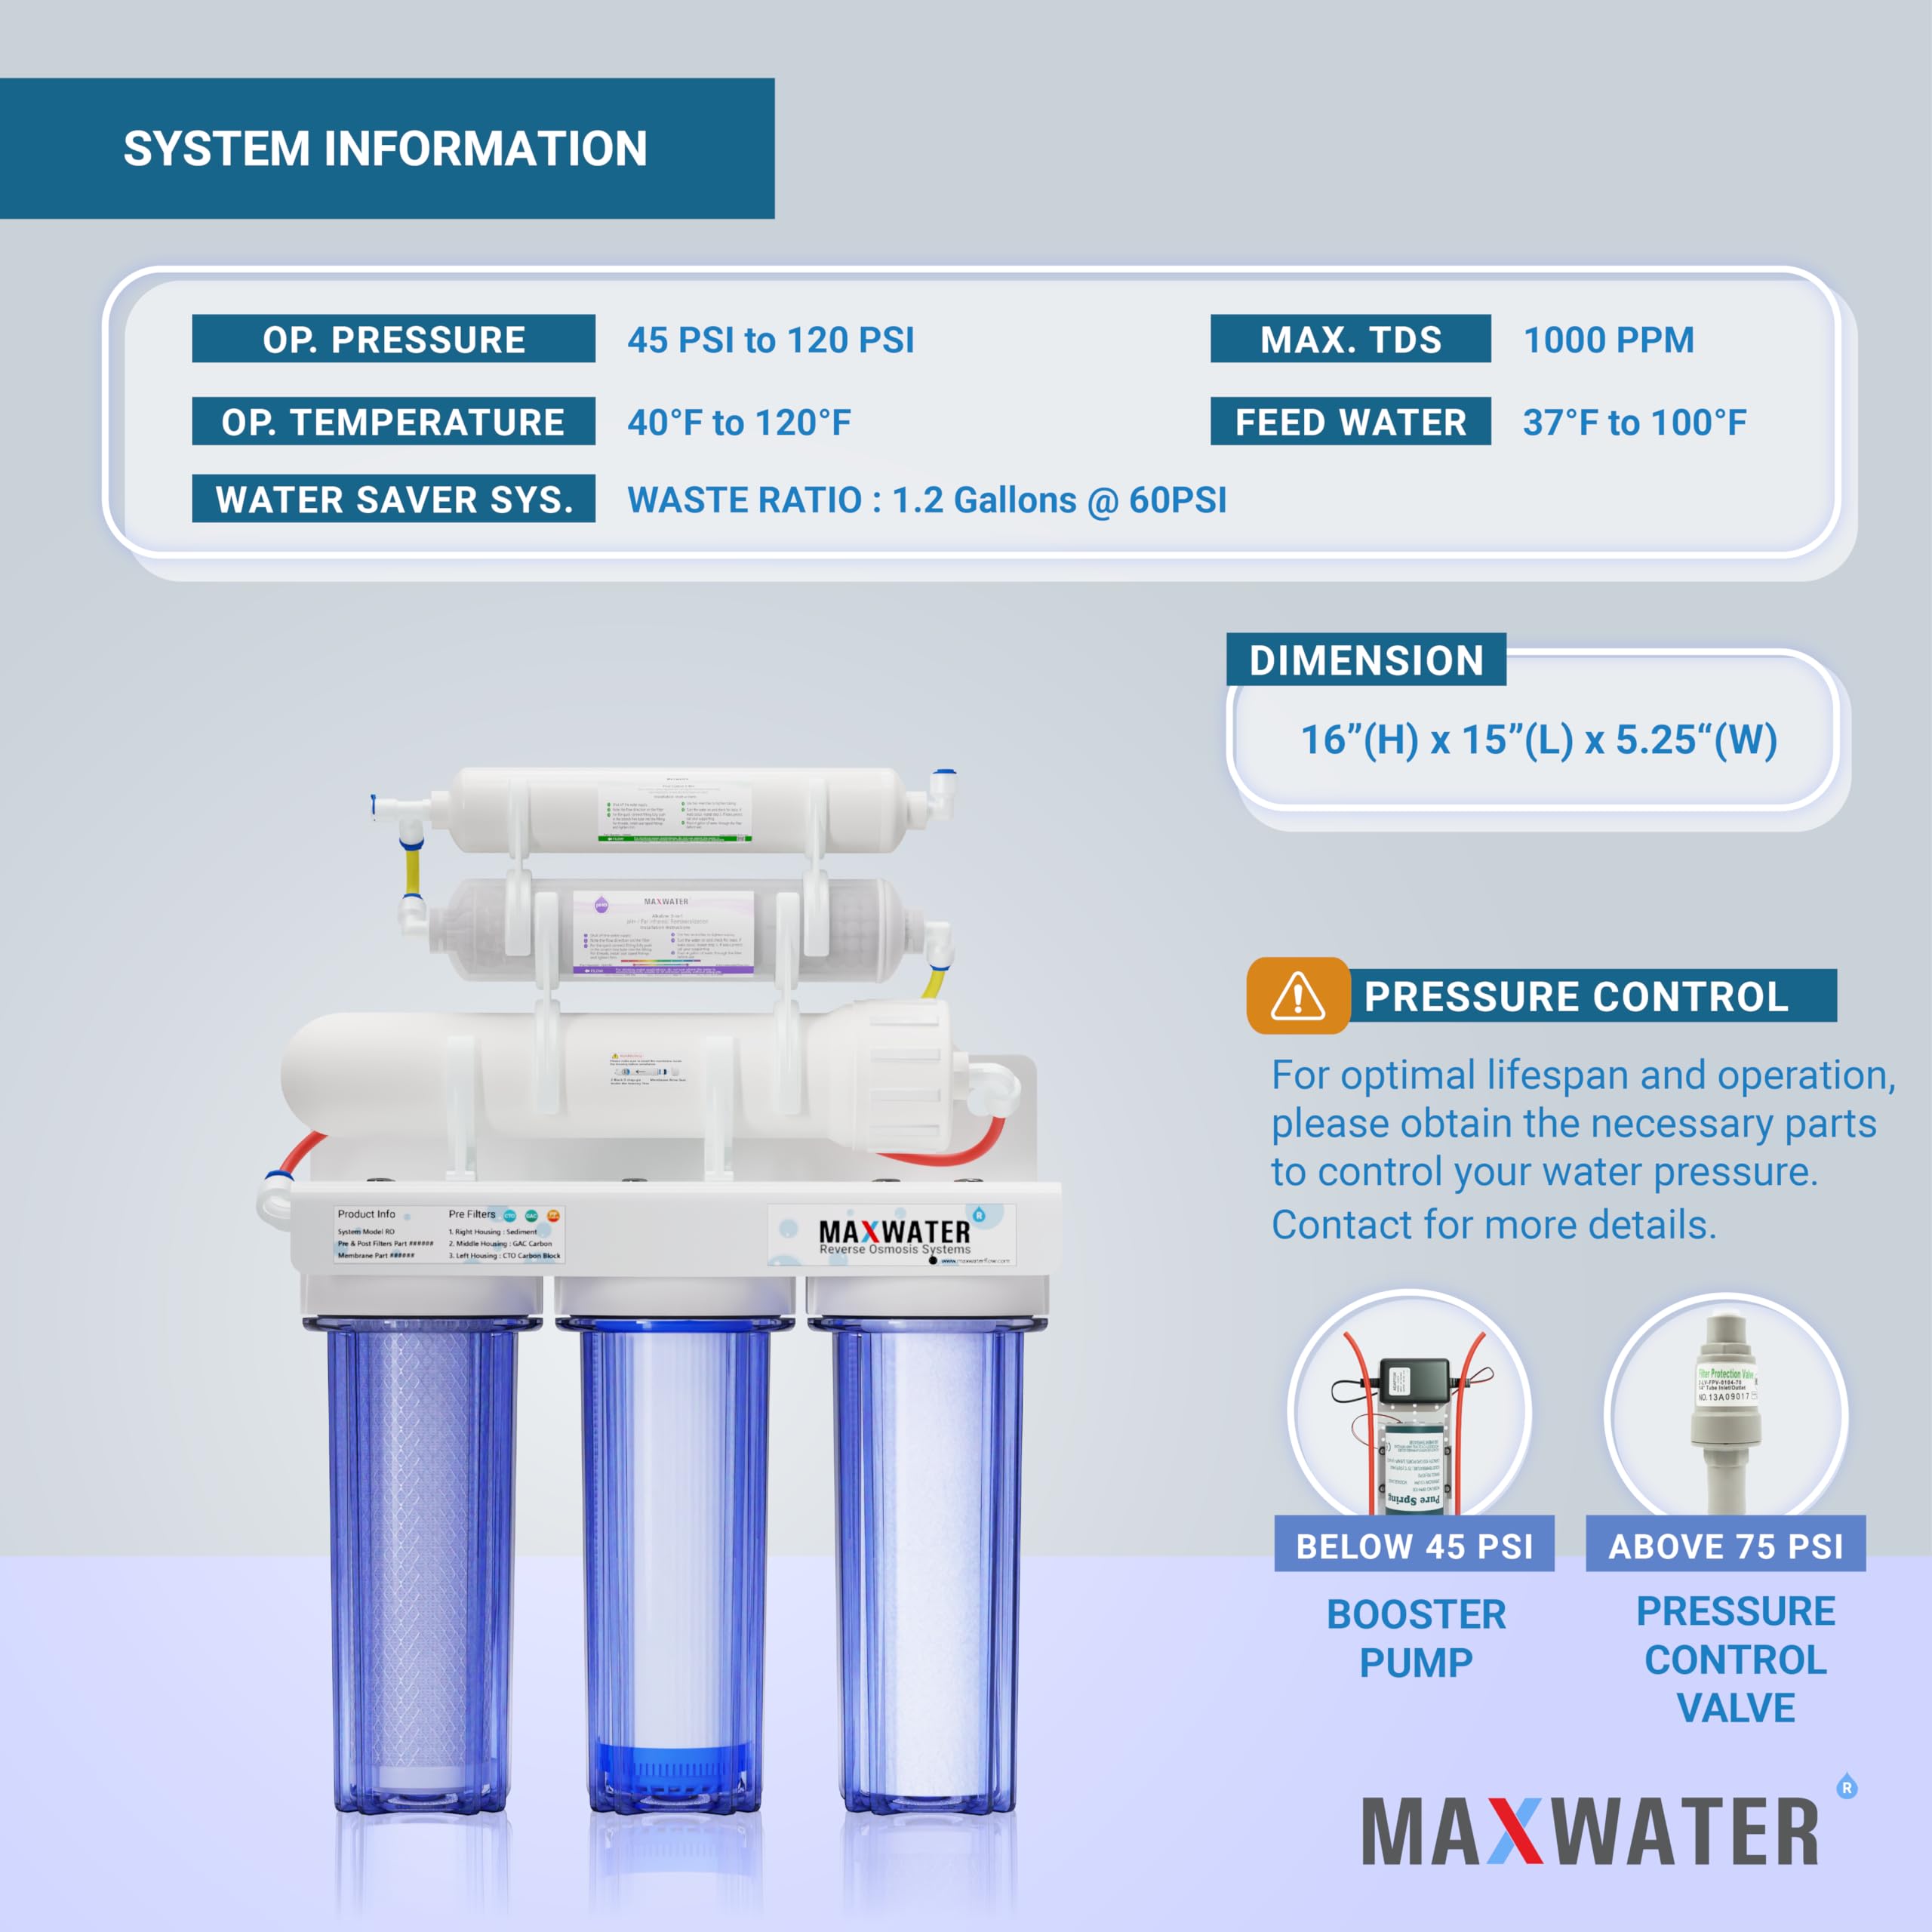 Max Water 8 Stage 50 GPD (Gallon Per Day) RO (Reverse Osmosis) + pH Alkaline (3 in 1) Under Sink Water Filter System for Drinking